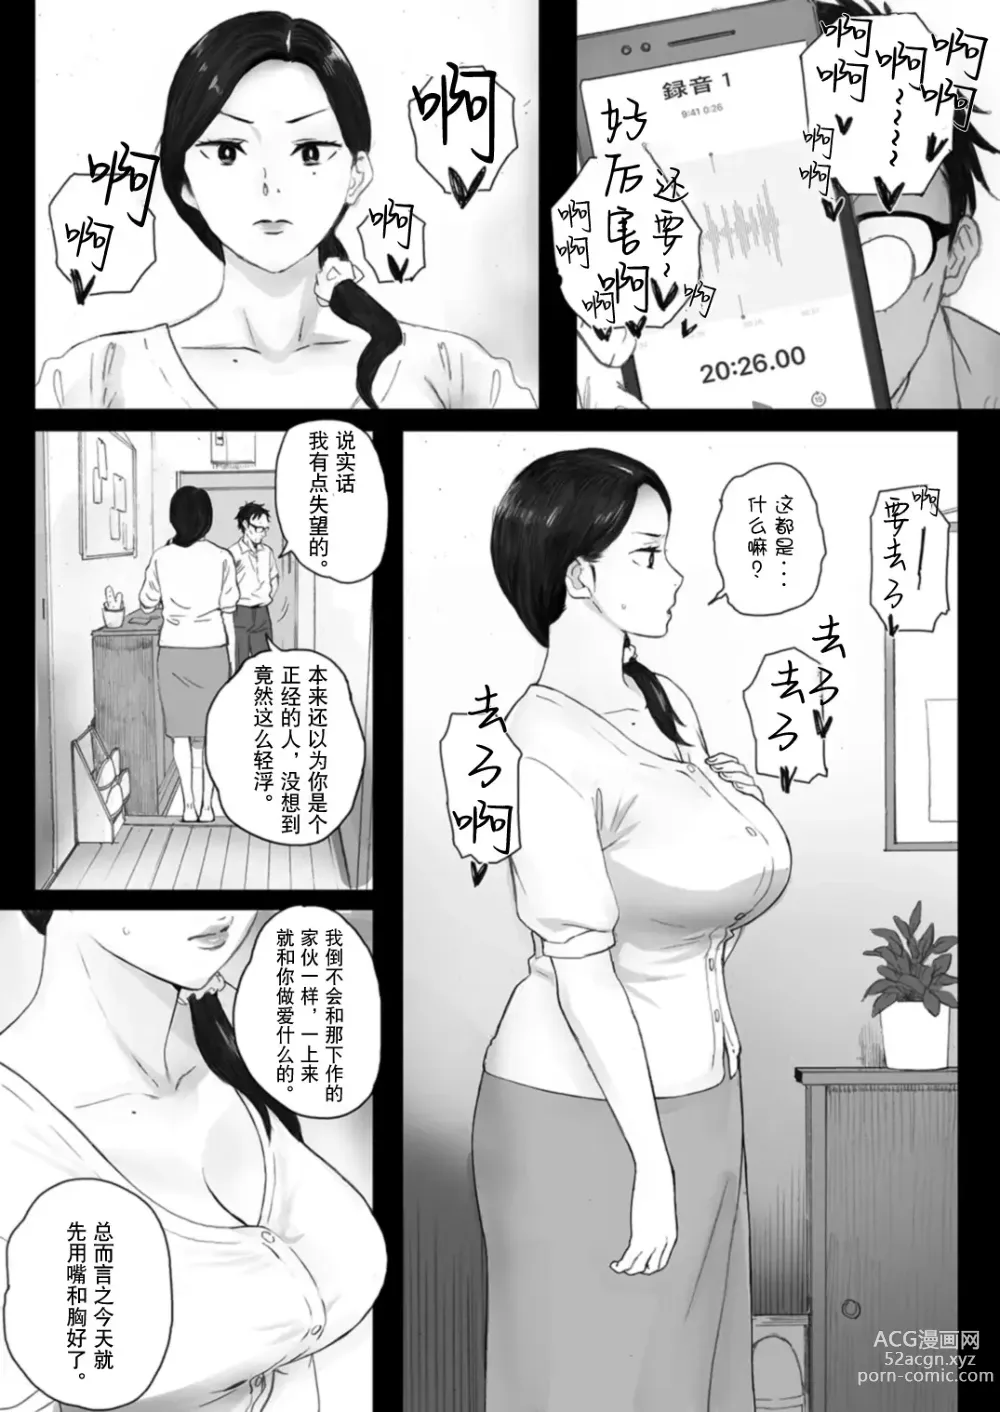 Page 20 of doujinshi 706 rooms